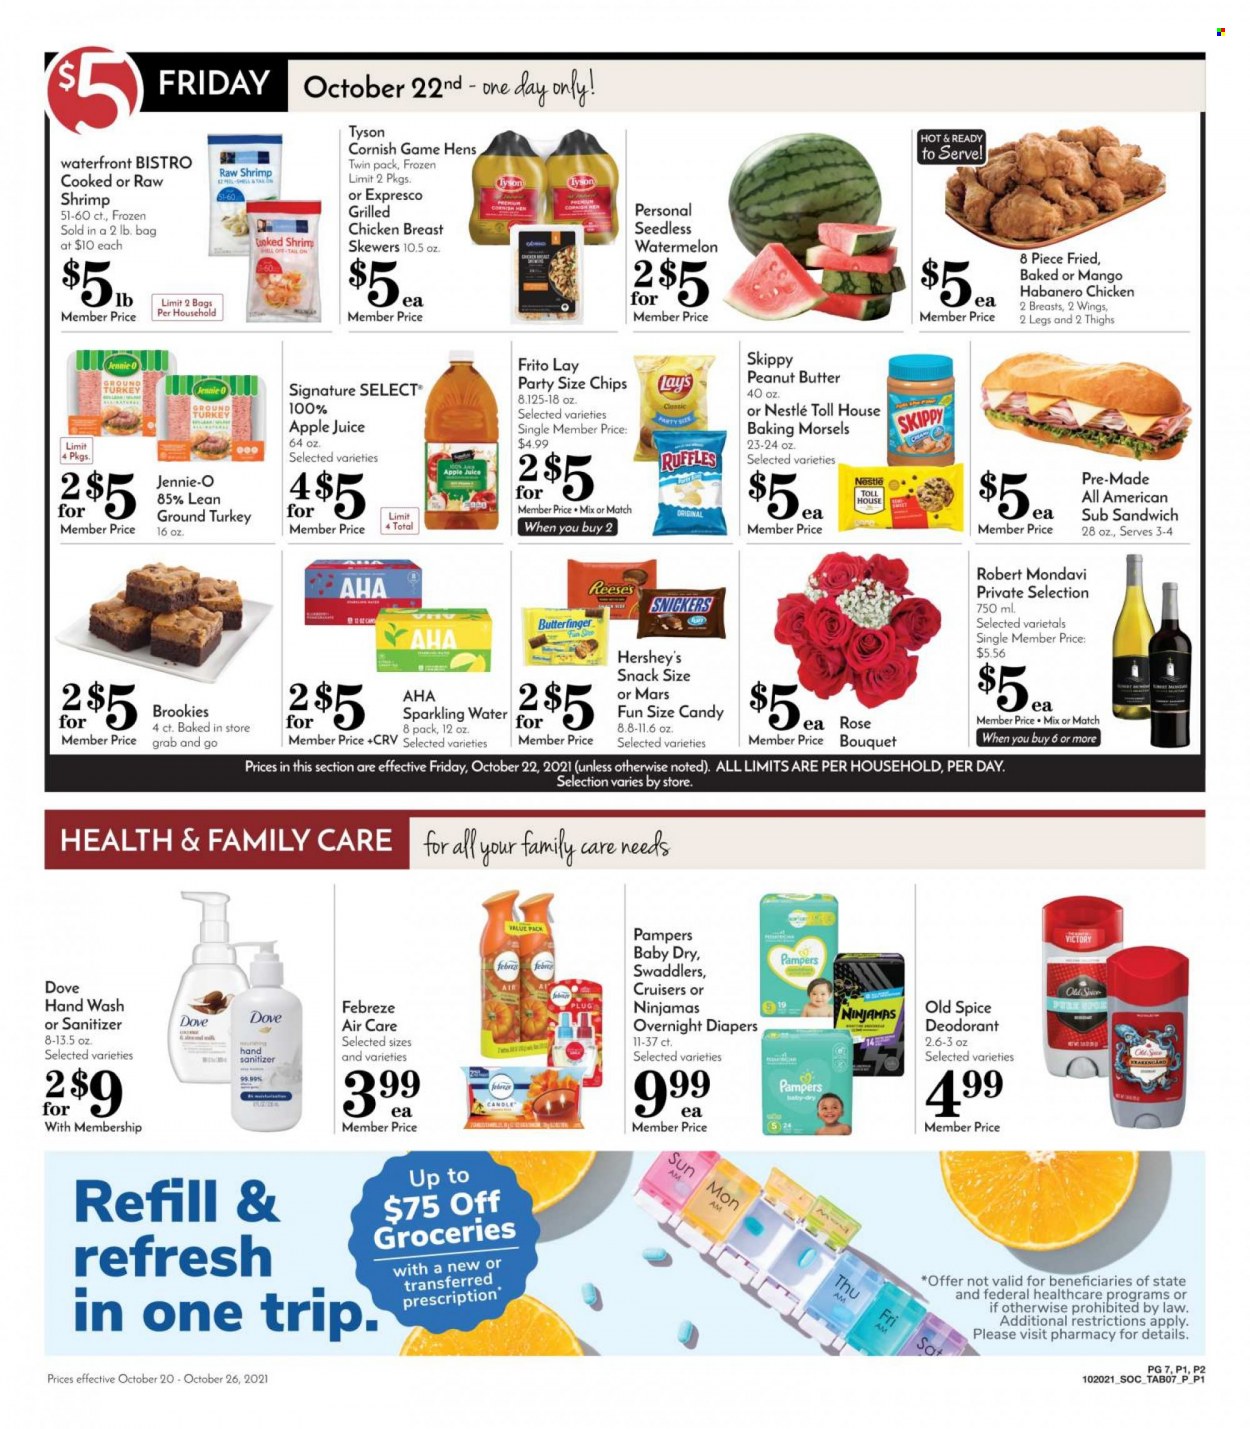 thumbnail - Pavilions Flyer - 10/20/2021 - 10/26/2021 - Sales products - watermelon, shrimps, sandwich, habanero chicken, Reese's, Hershey's, Nestlé, snack, Snickers, Mars, Lay’s, Ruffles, spice, peanut butter, apple juice, juice, sparkling water, wine, rosé wine, cornish hen, ground turkey, chicken breasts, Pampers, nappies, Febreze, Dove, Old Spice, hand wash, anti-perspirant, deodorant, hand sanitizer, candle, bouquet, rose. Page 9.